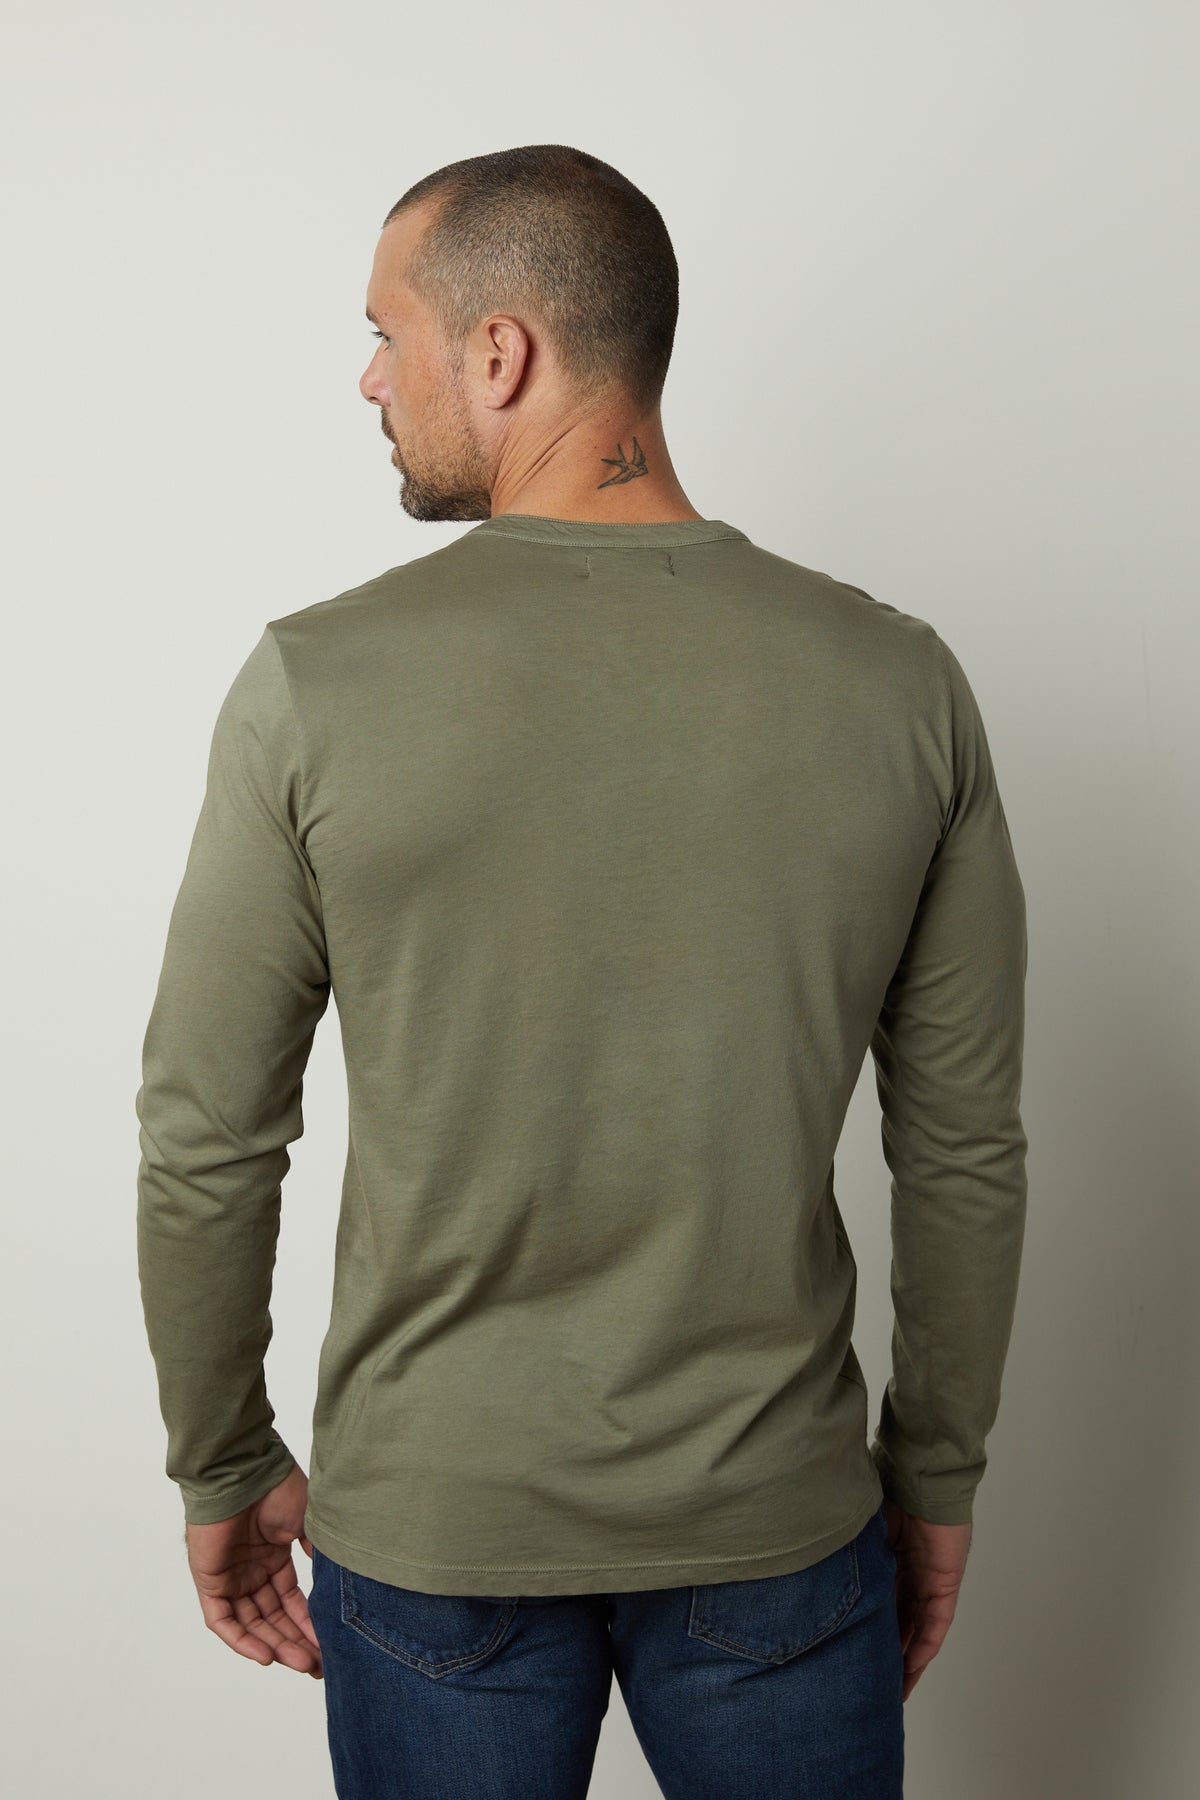 The back view of a man wearing a Velvet by Graham & Spencer ALVARO COTTON JERSEY HENLEY.-35782632800449